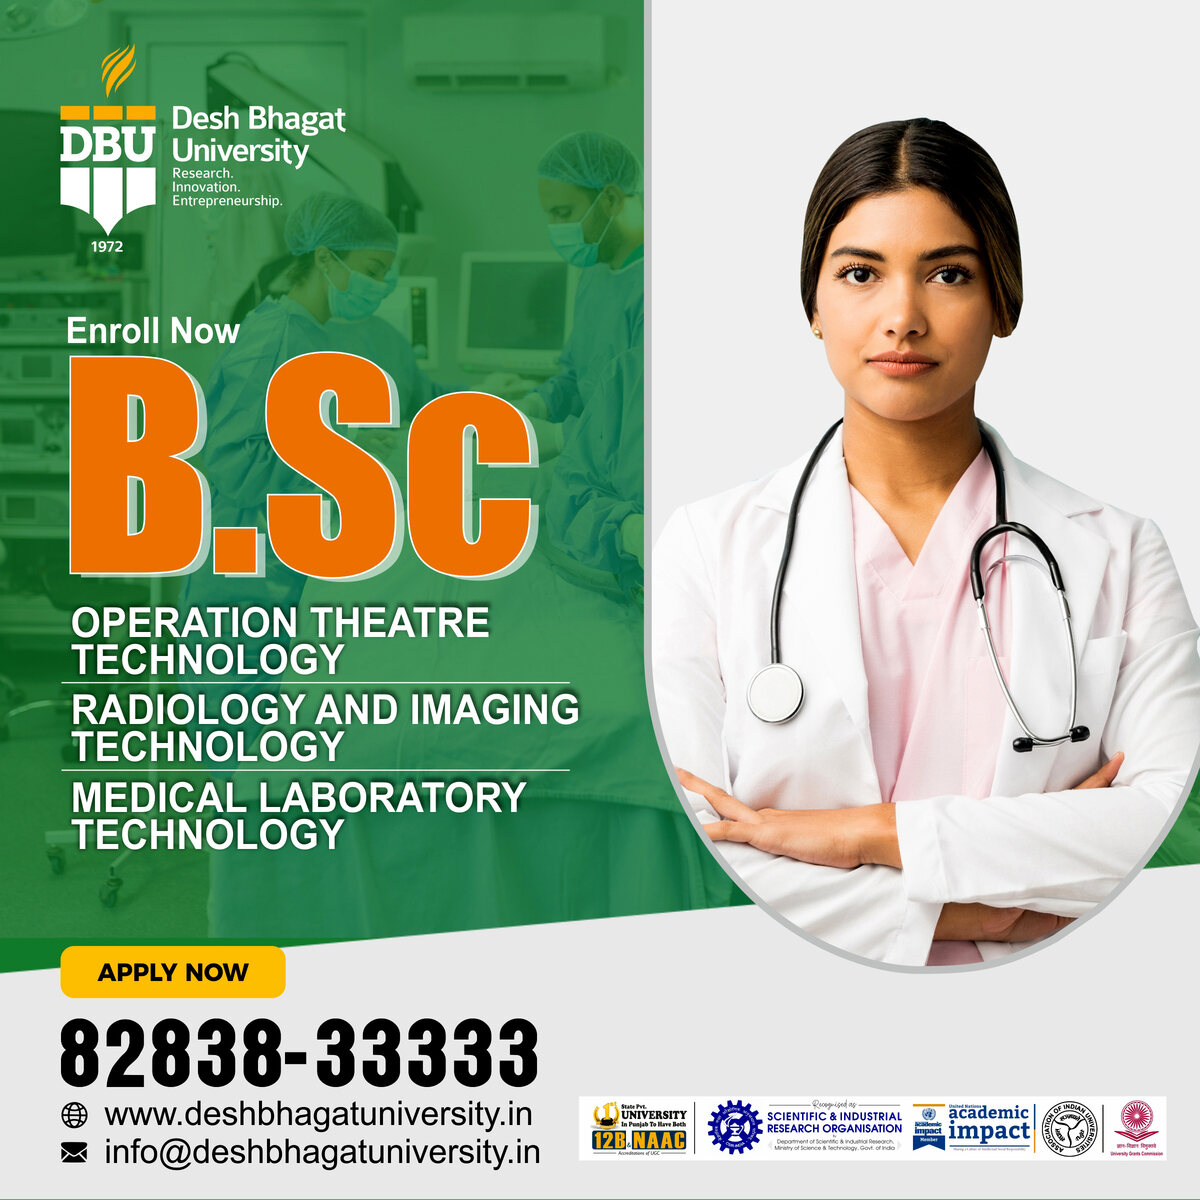 Faculty of B.SC OPREATION THEATRE TECHNOLOGY RADIOLOGY AND IMAGING TECHNOLOGY MEDICAL LABORATORY TECHNOLOGY